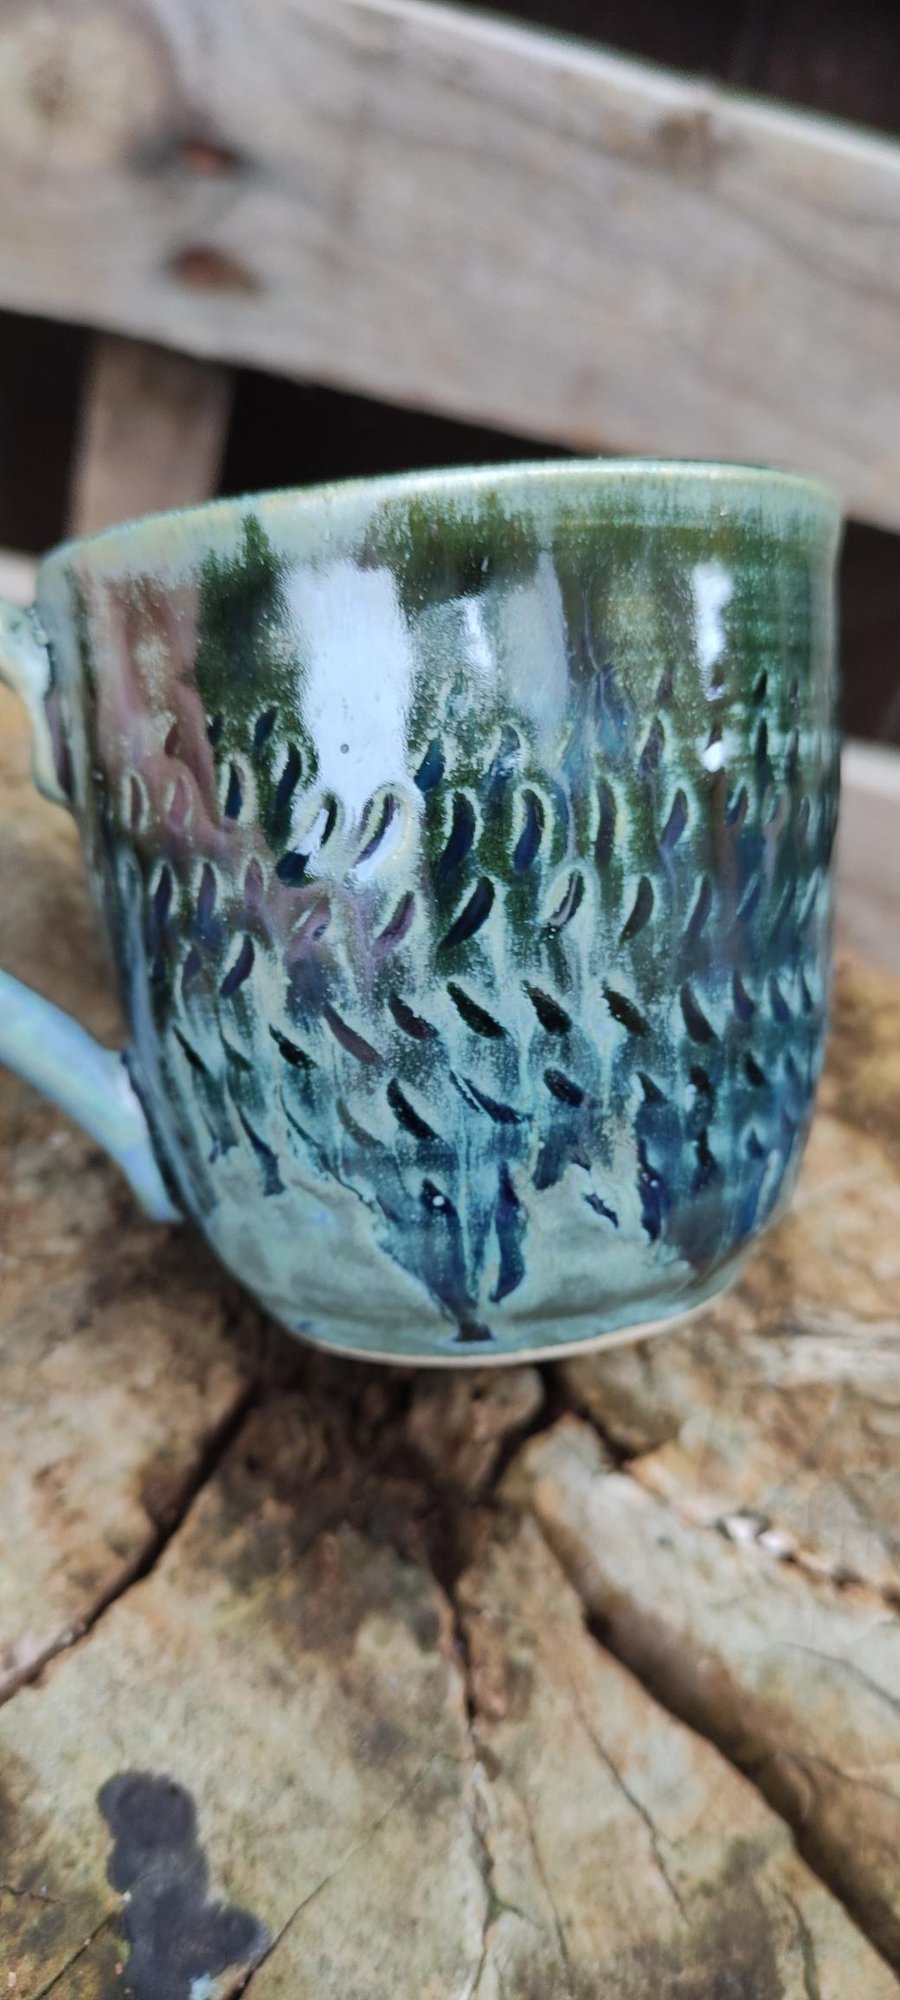 Greeny textured cup